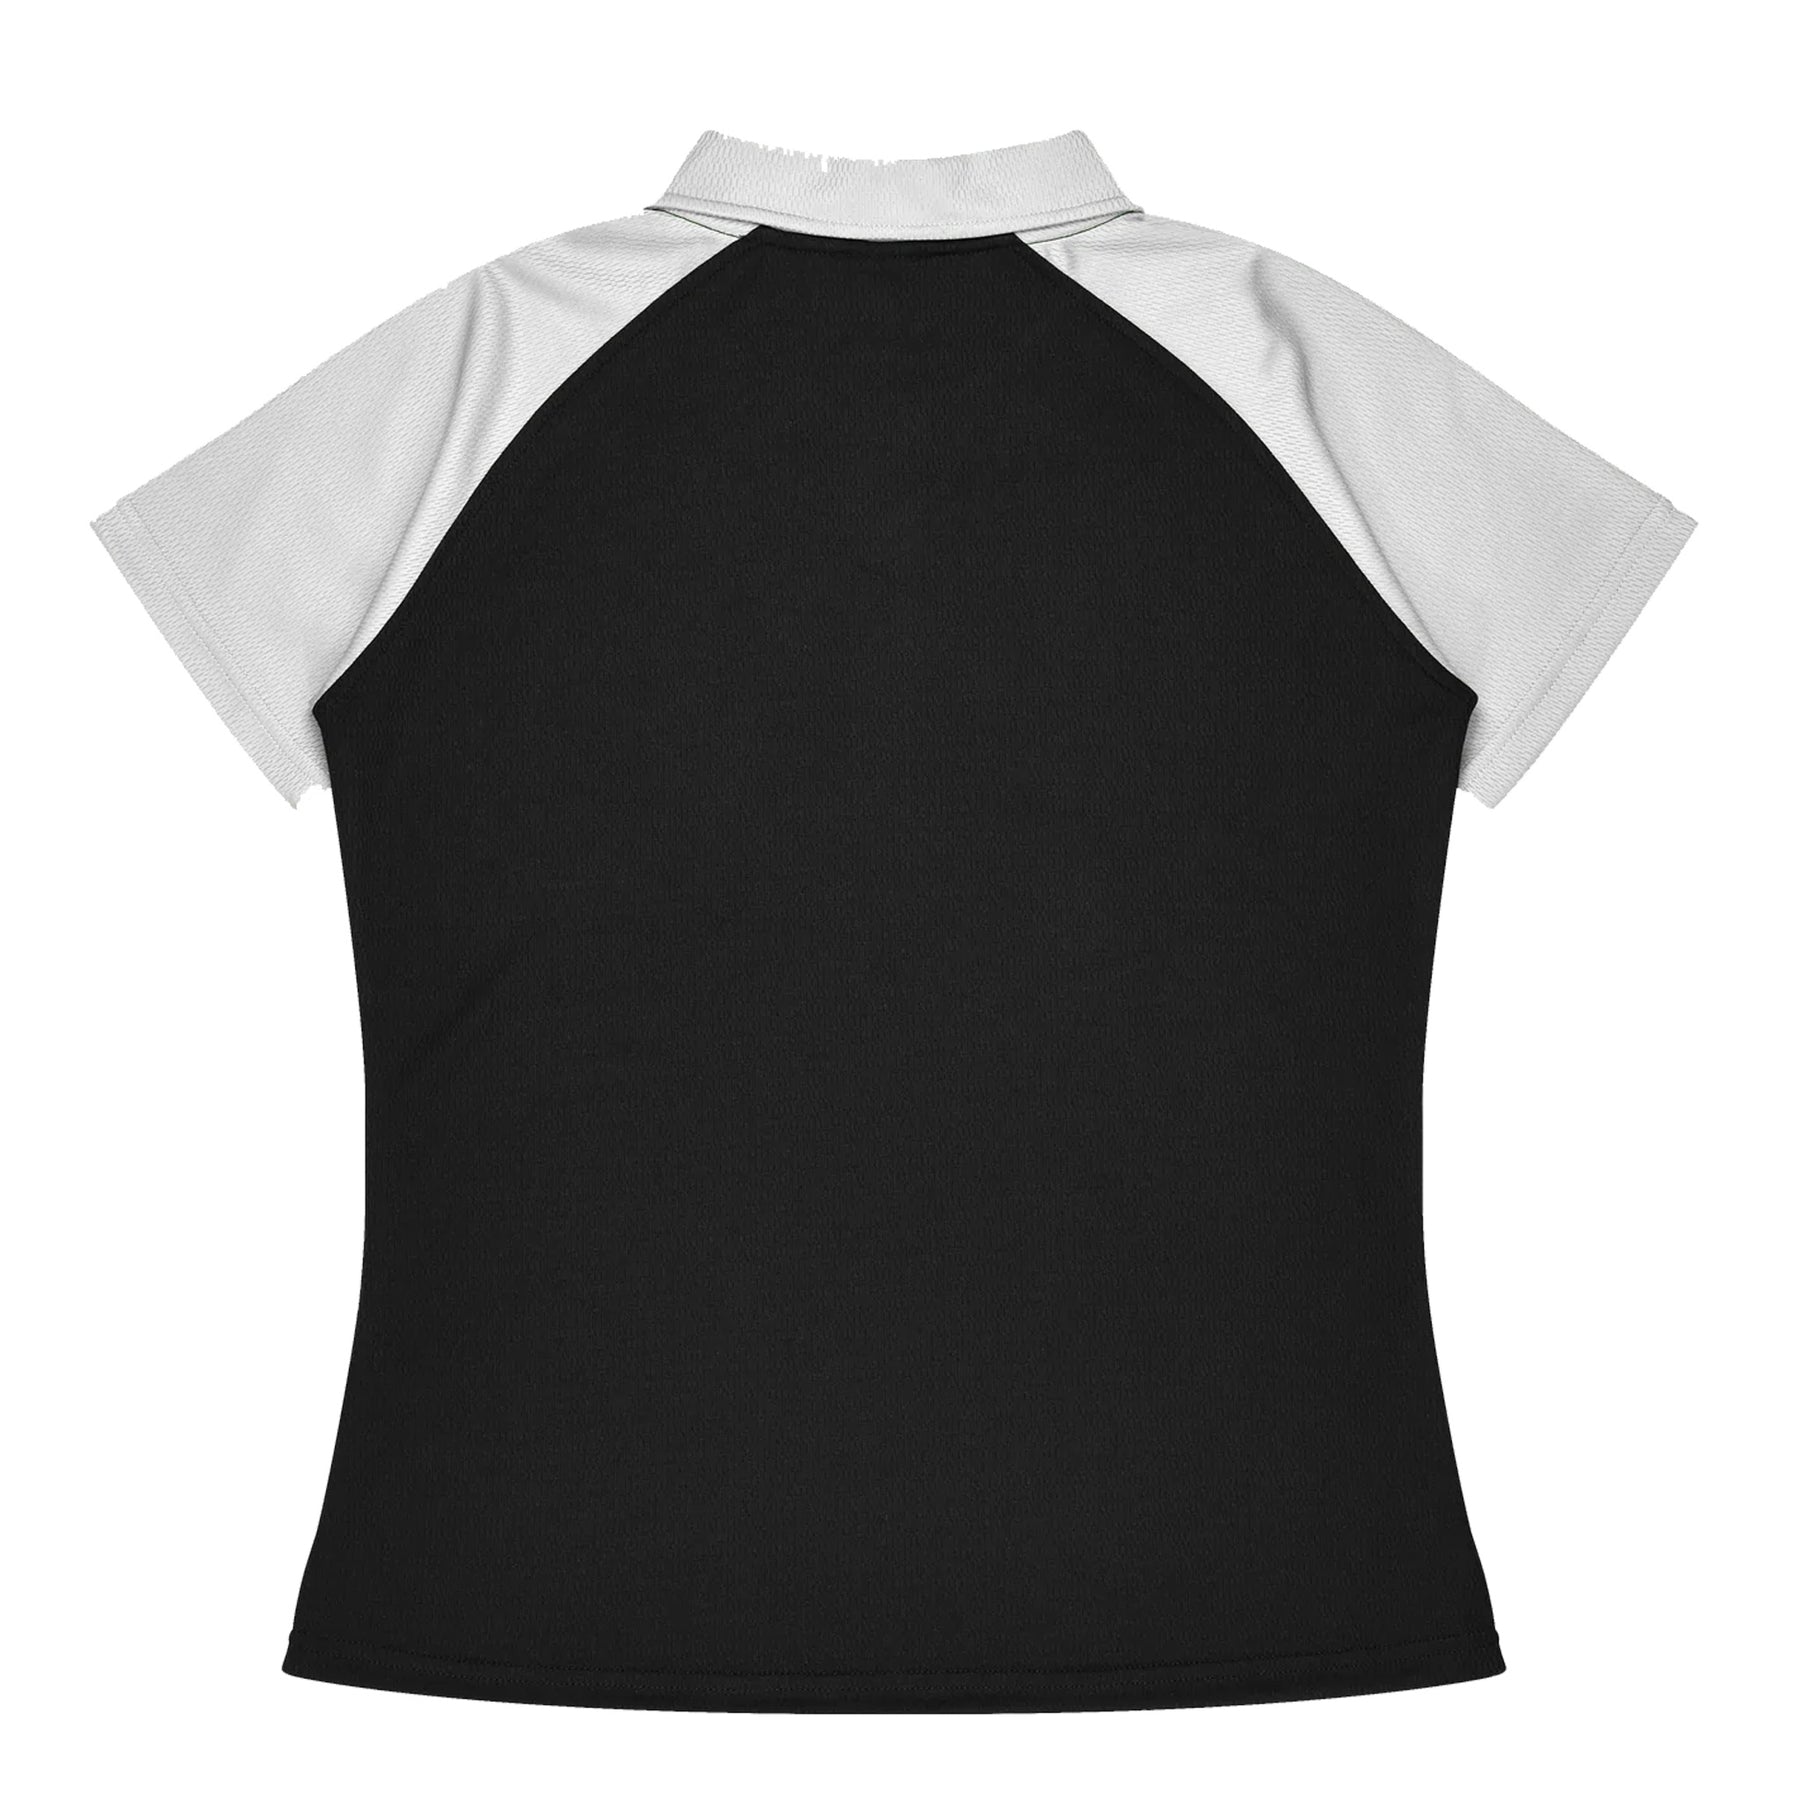 manly ladies polo in black white